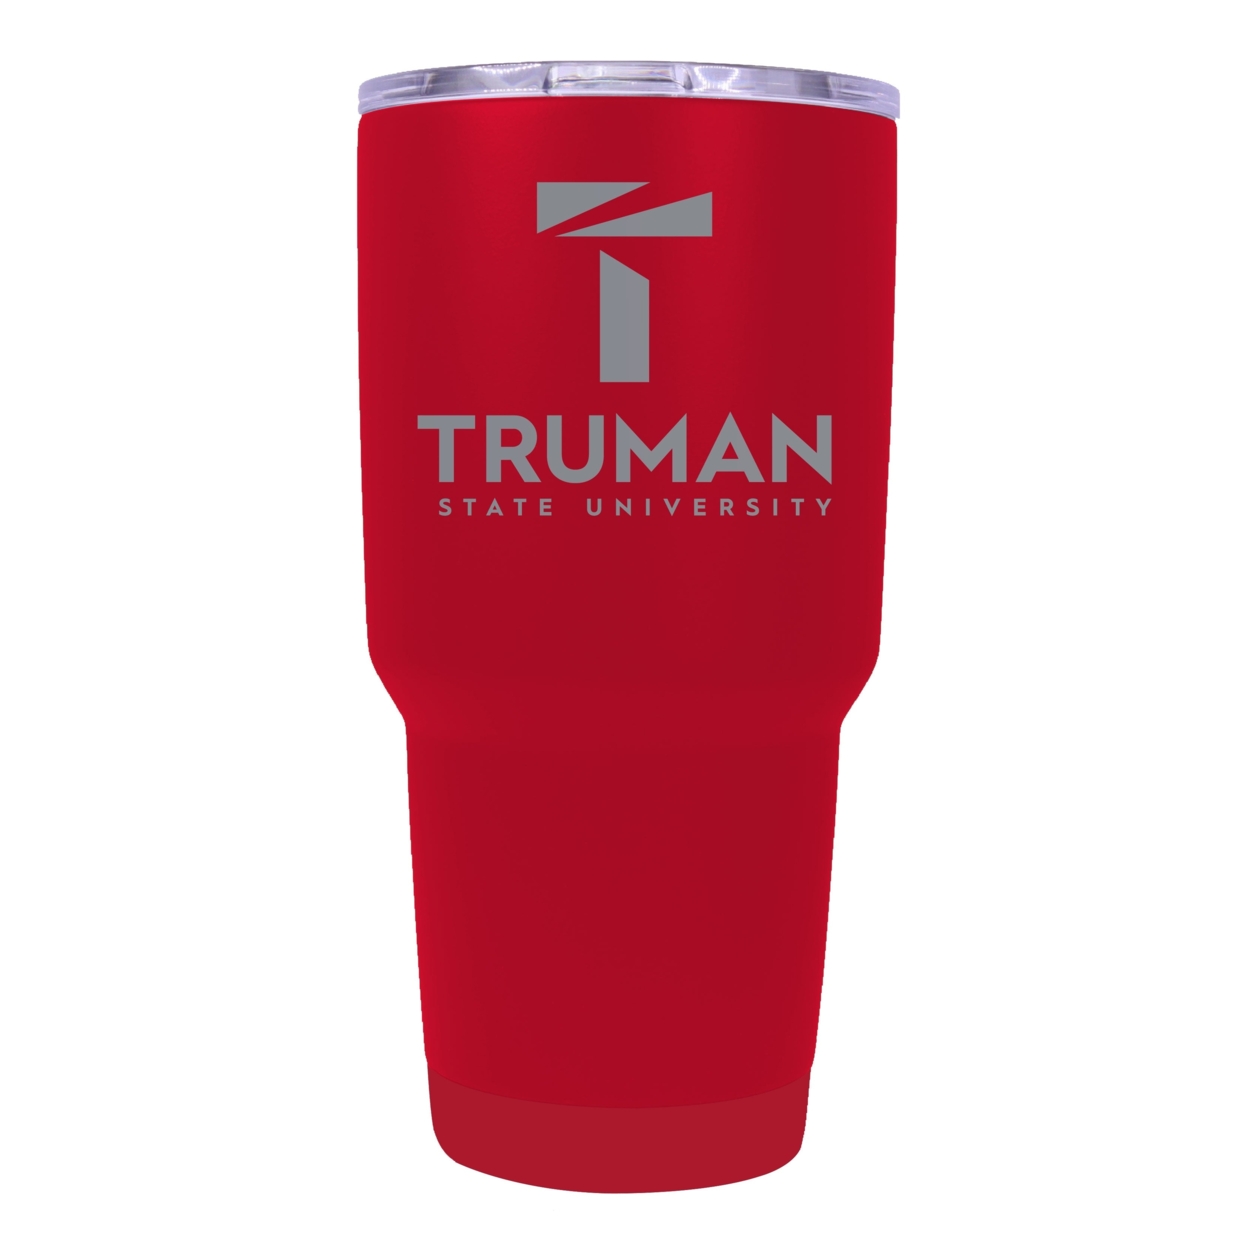 Truman State University 24 Oz Laser Engraved Stainless Steel Insulated Tumbler - Choose Your Color. - Red